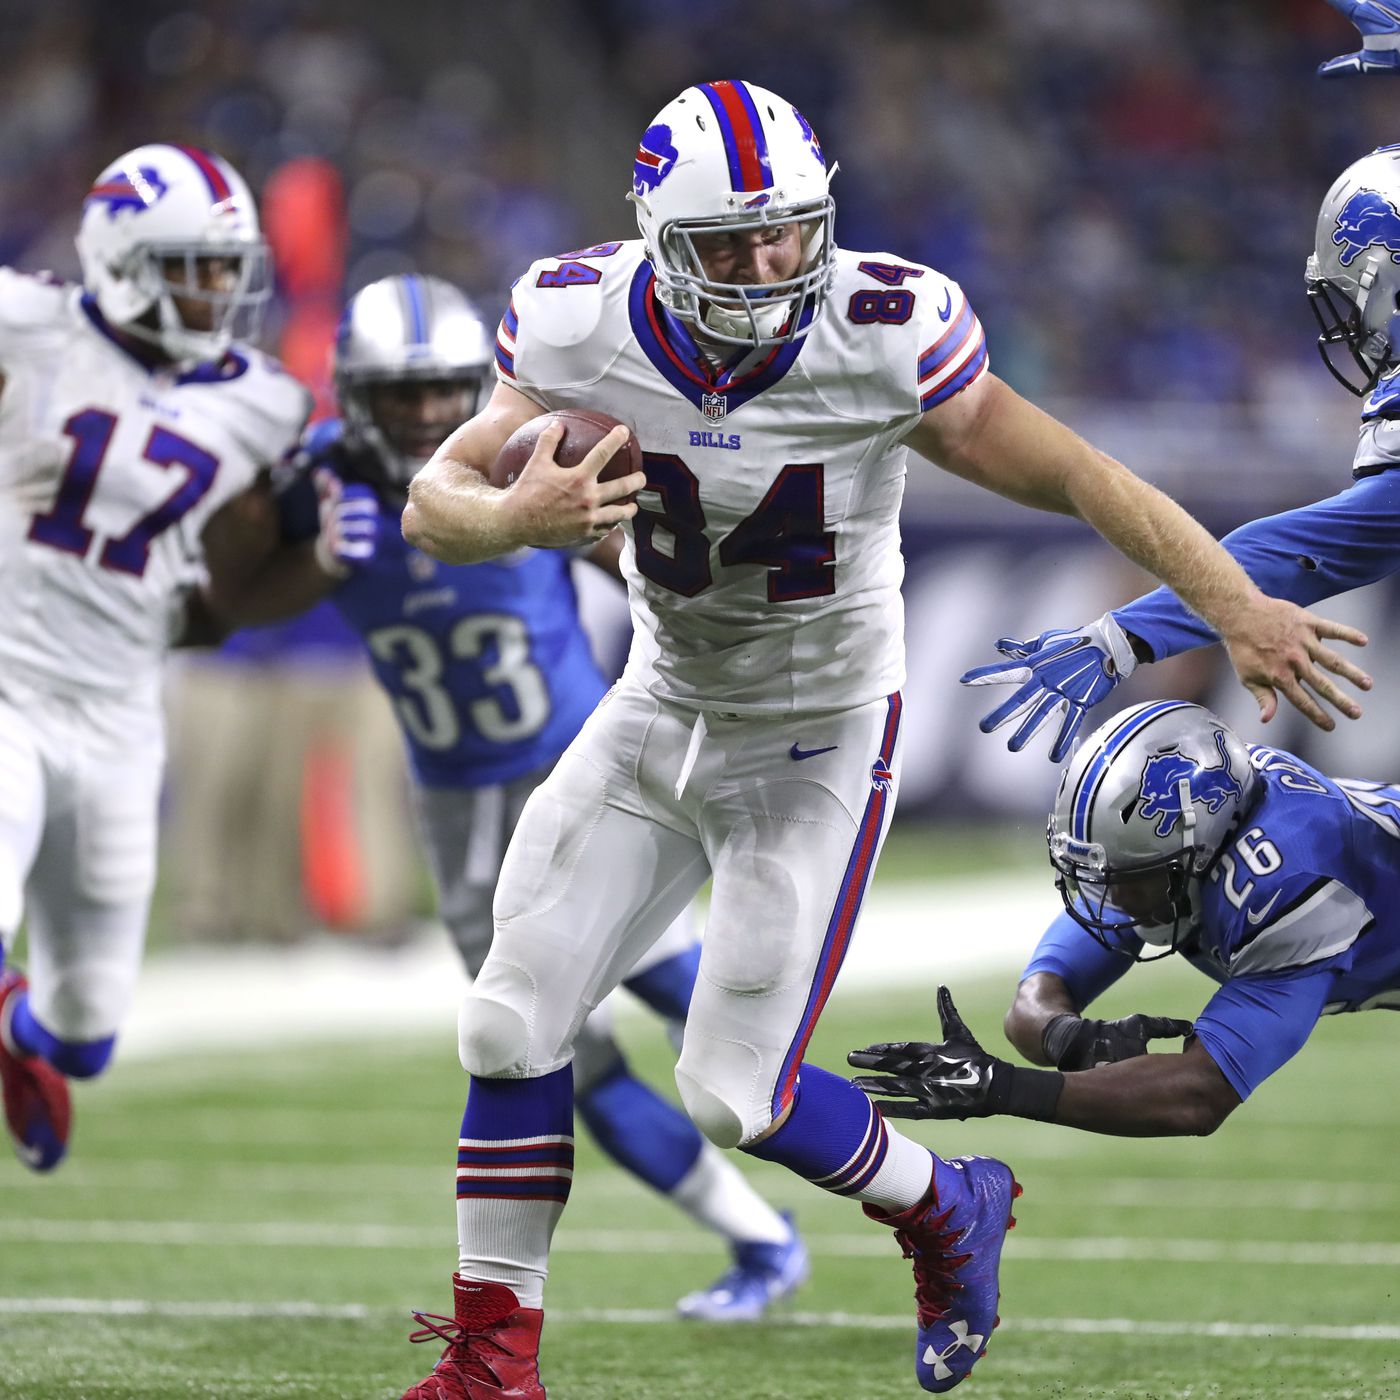 Lions vs Bills: broadcast info, TV channel, announcers, streaming